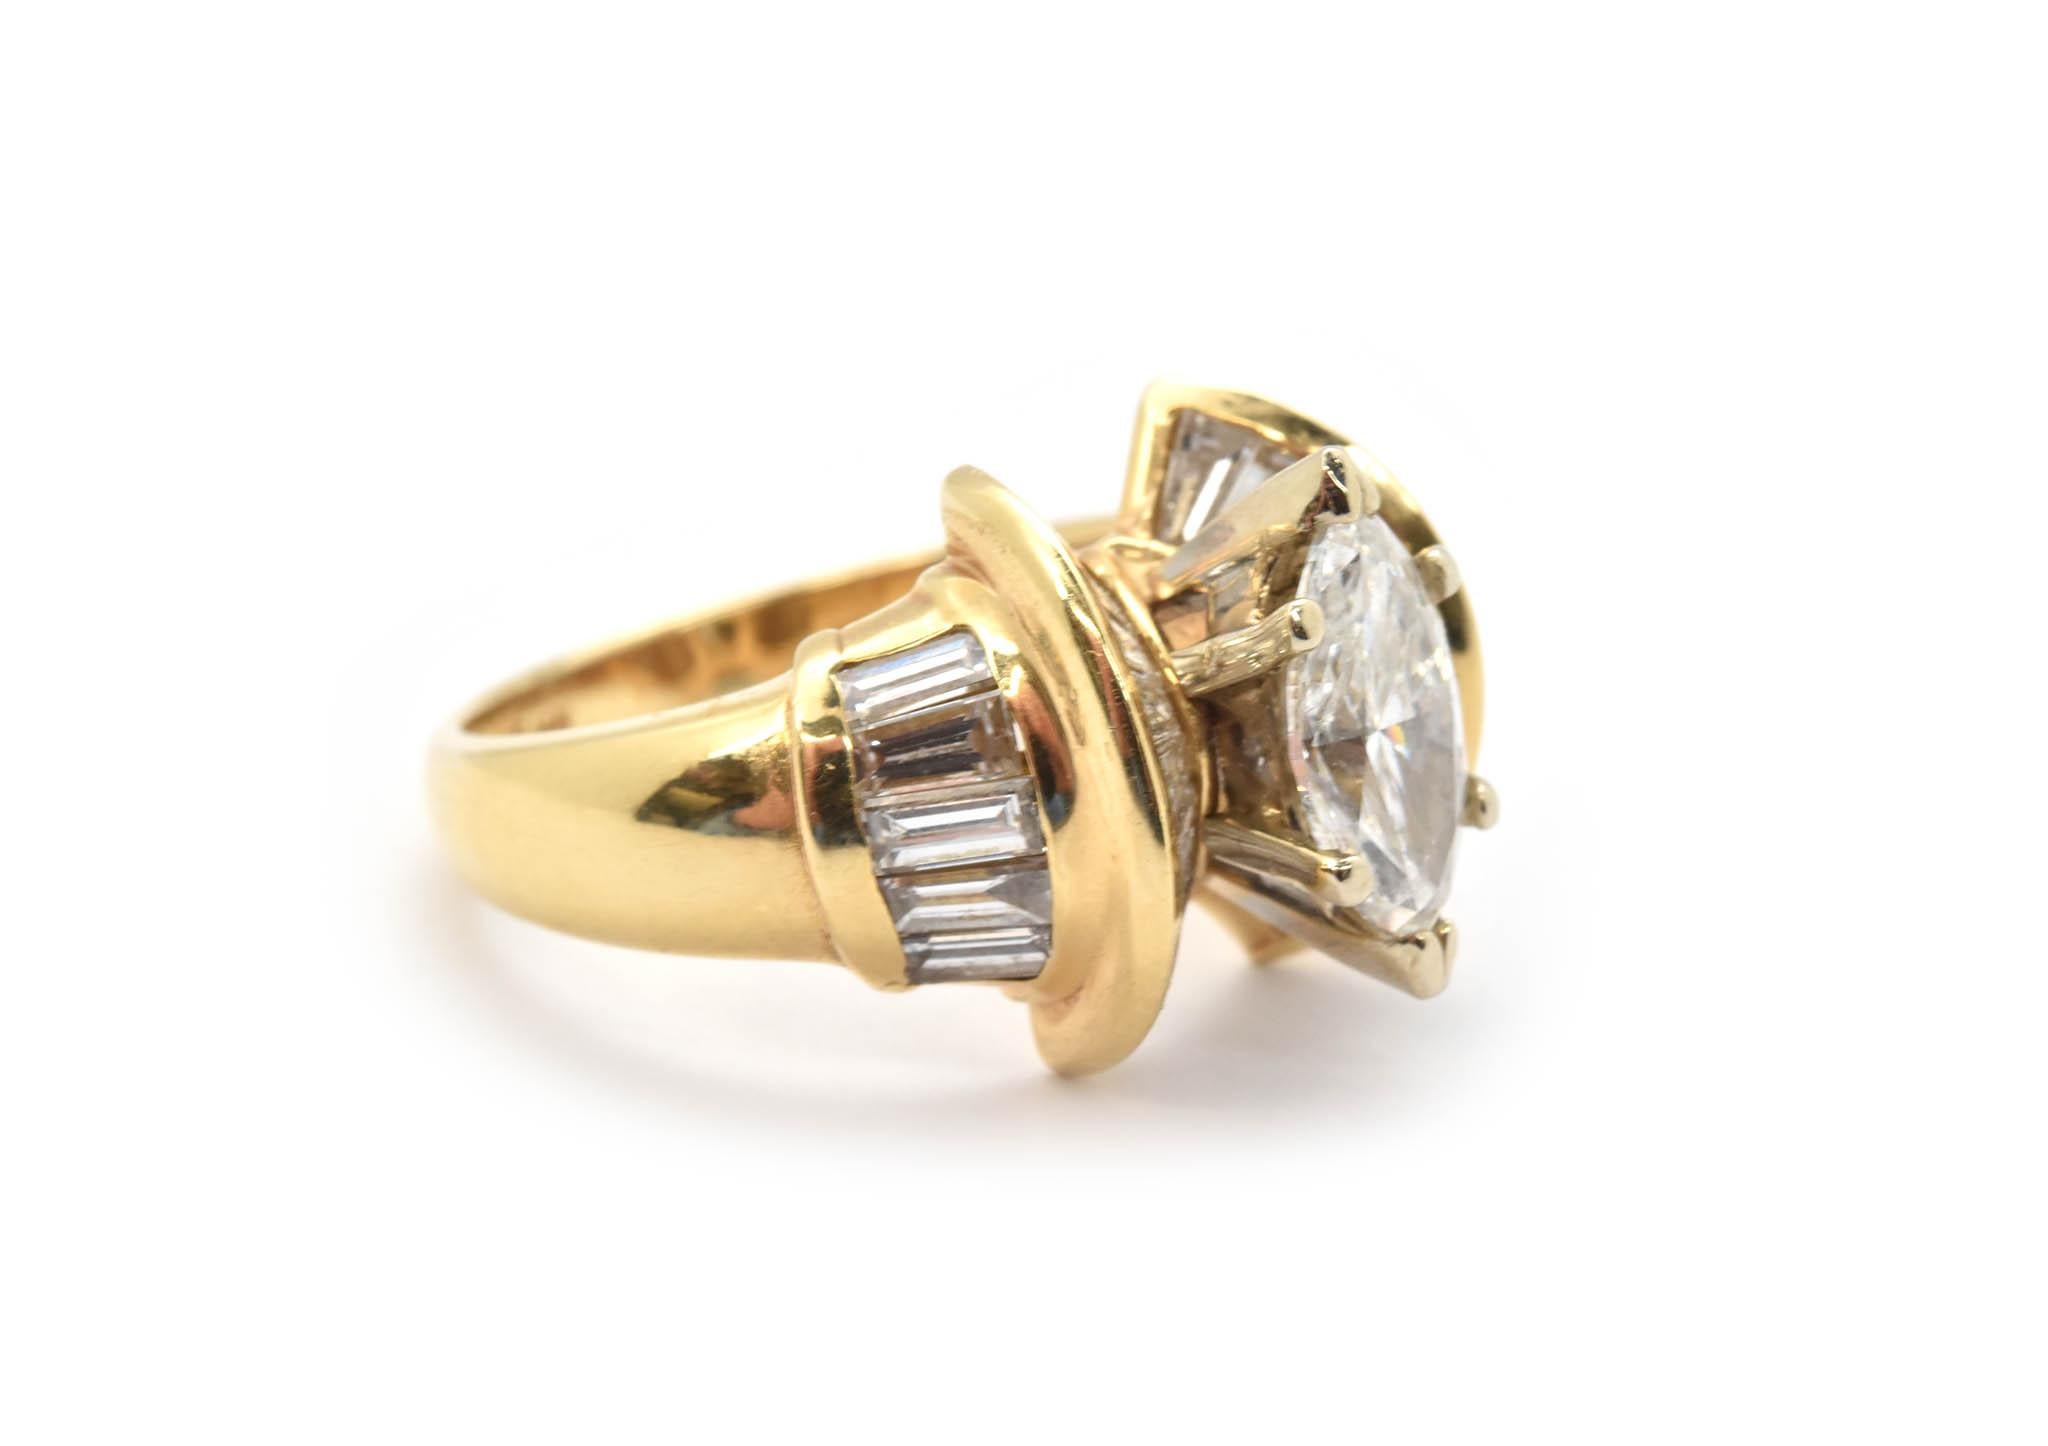 Designer: custom design
Material: 14k yellow gold
Center Stone: 1.00 carat marquise cut diamond 
Color: K
Clarity: VS2
Baguette Diamonds: 0.36 carat weight
Carat Total Weight: 1.36
Ring Size: 5 1/4 (please allow two additional shipping days for ring